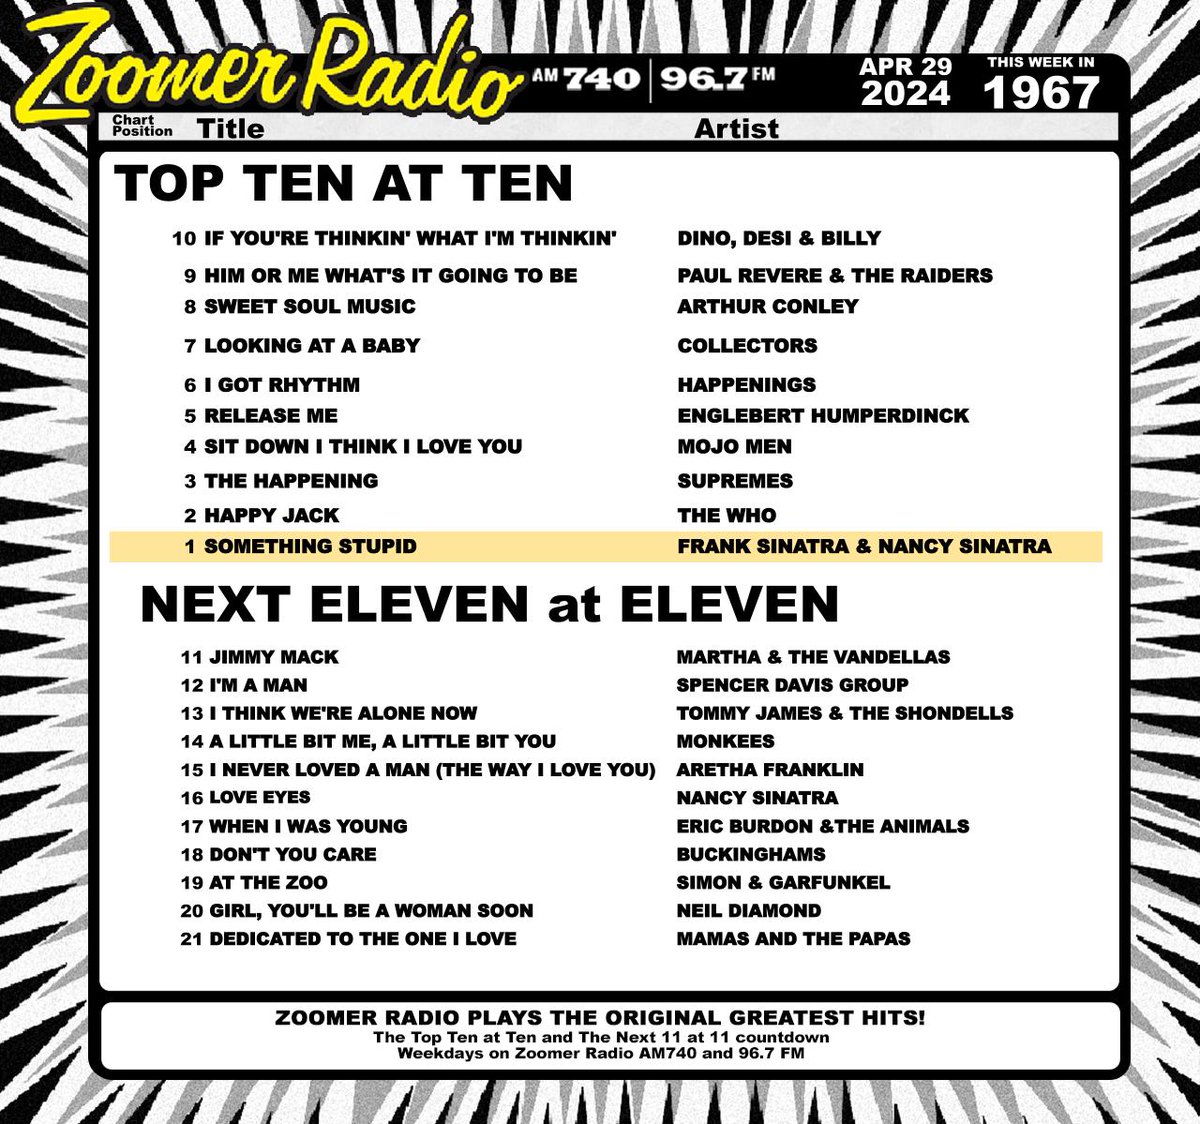 If You're Thinkin' What I'm Thinkin', you should tune in to the #Top10at10 and #Next11at11! Listen live: zoomerradio.ca #Toronto #OnThisDay #Music #MusicHistory #Charts #Countdown